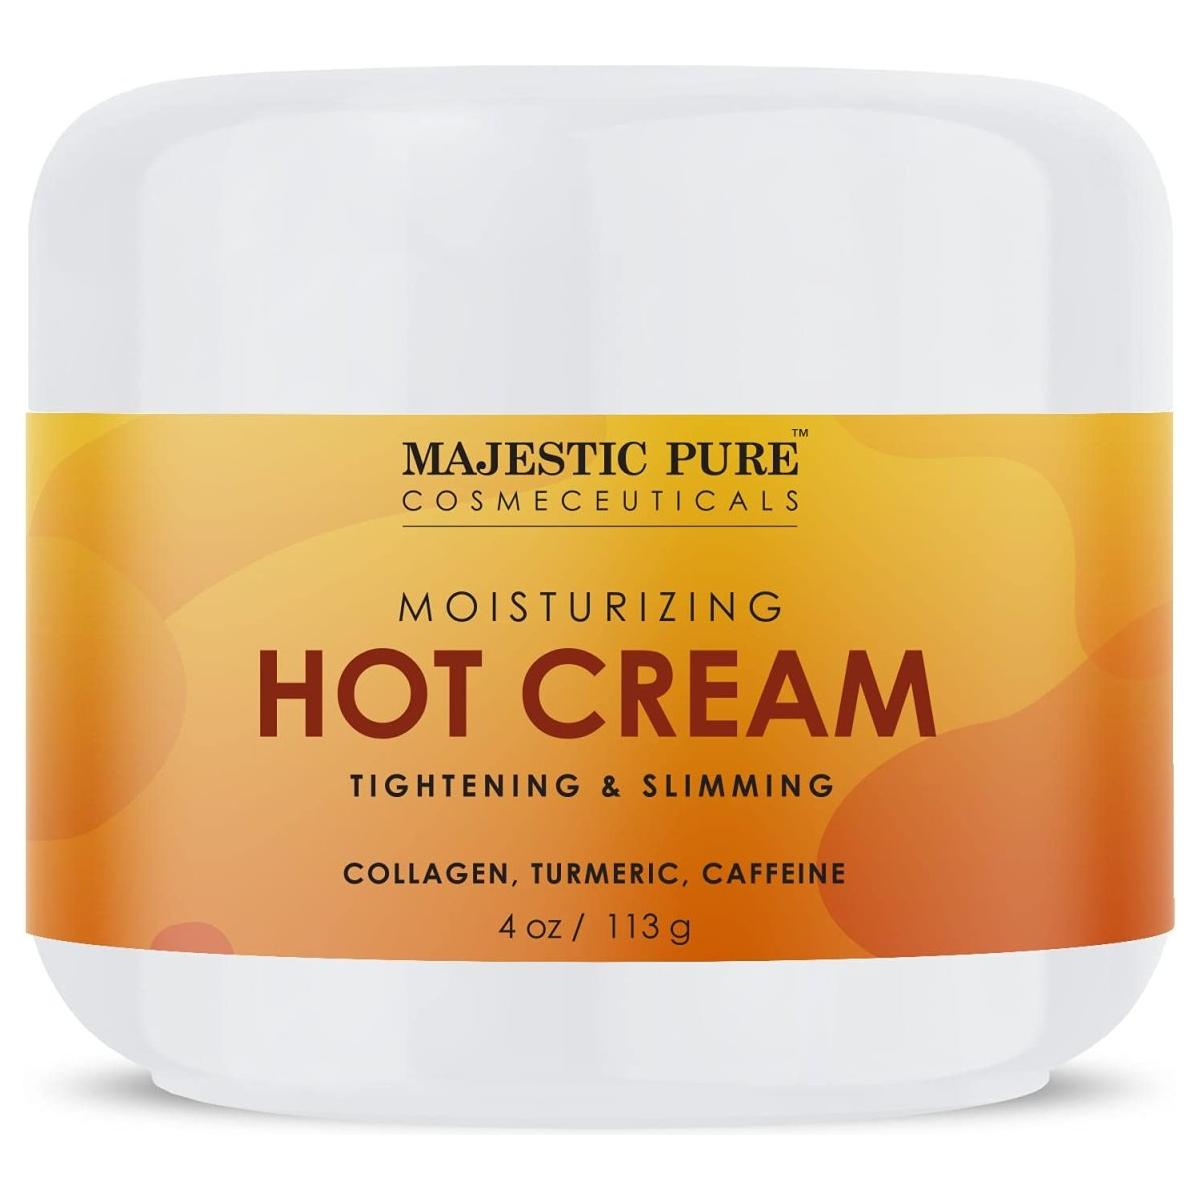 Majestic Pure Hot Cream - for Cellulite - 120ml - Glam Global UK